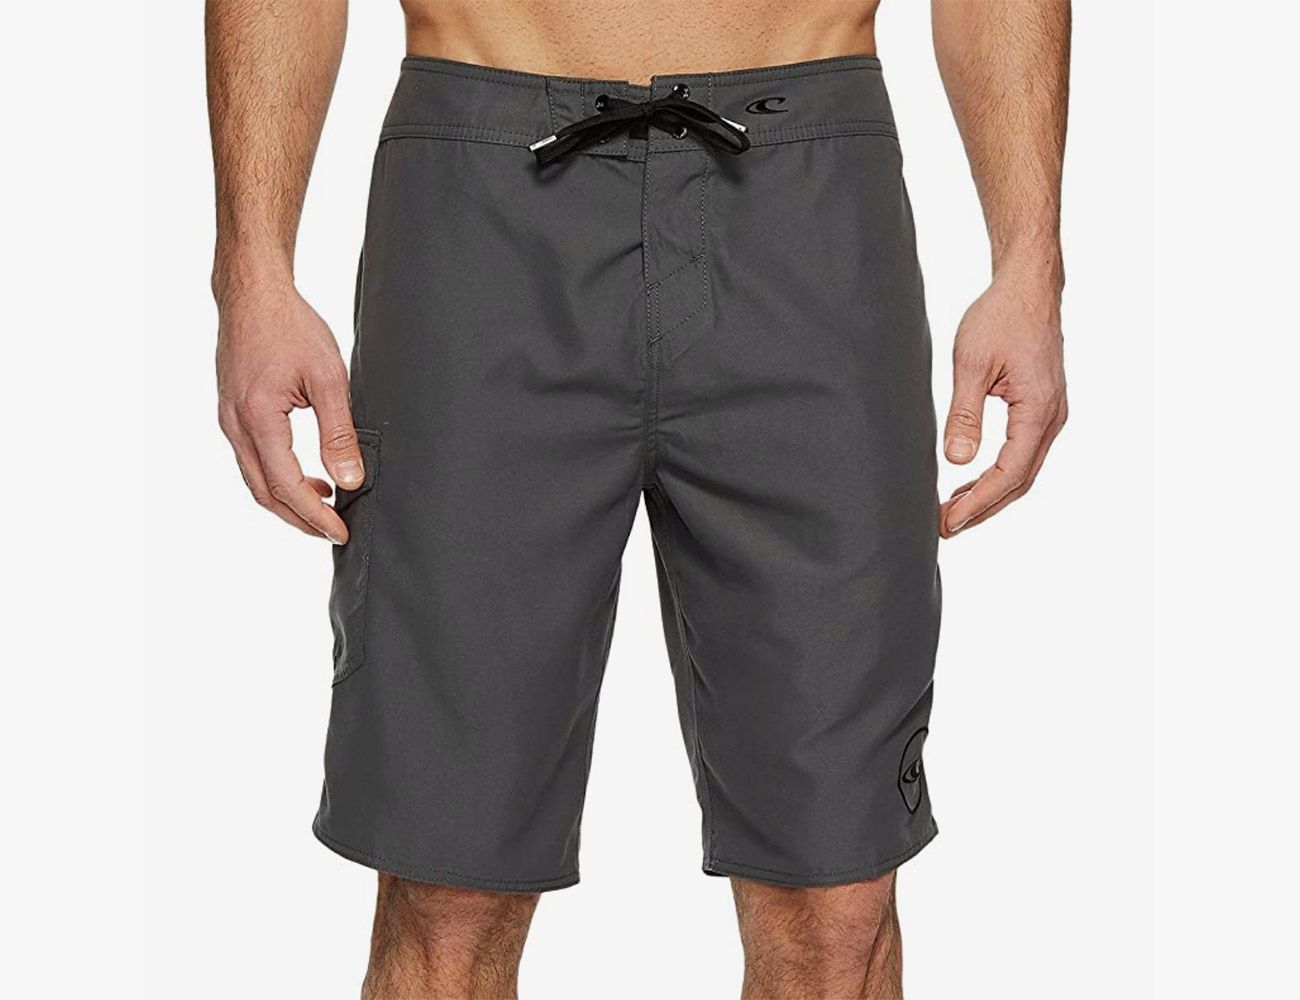 Symposium code tunnel The 18 Best Board Shorts to Buy Now